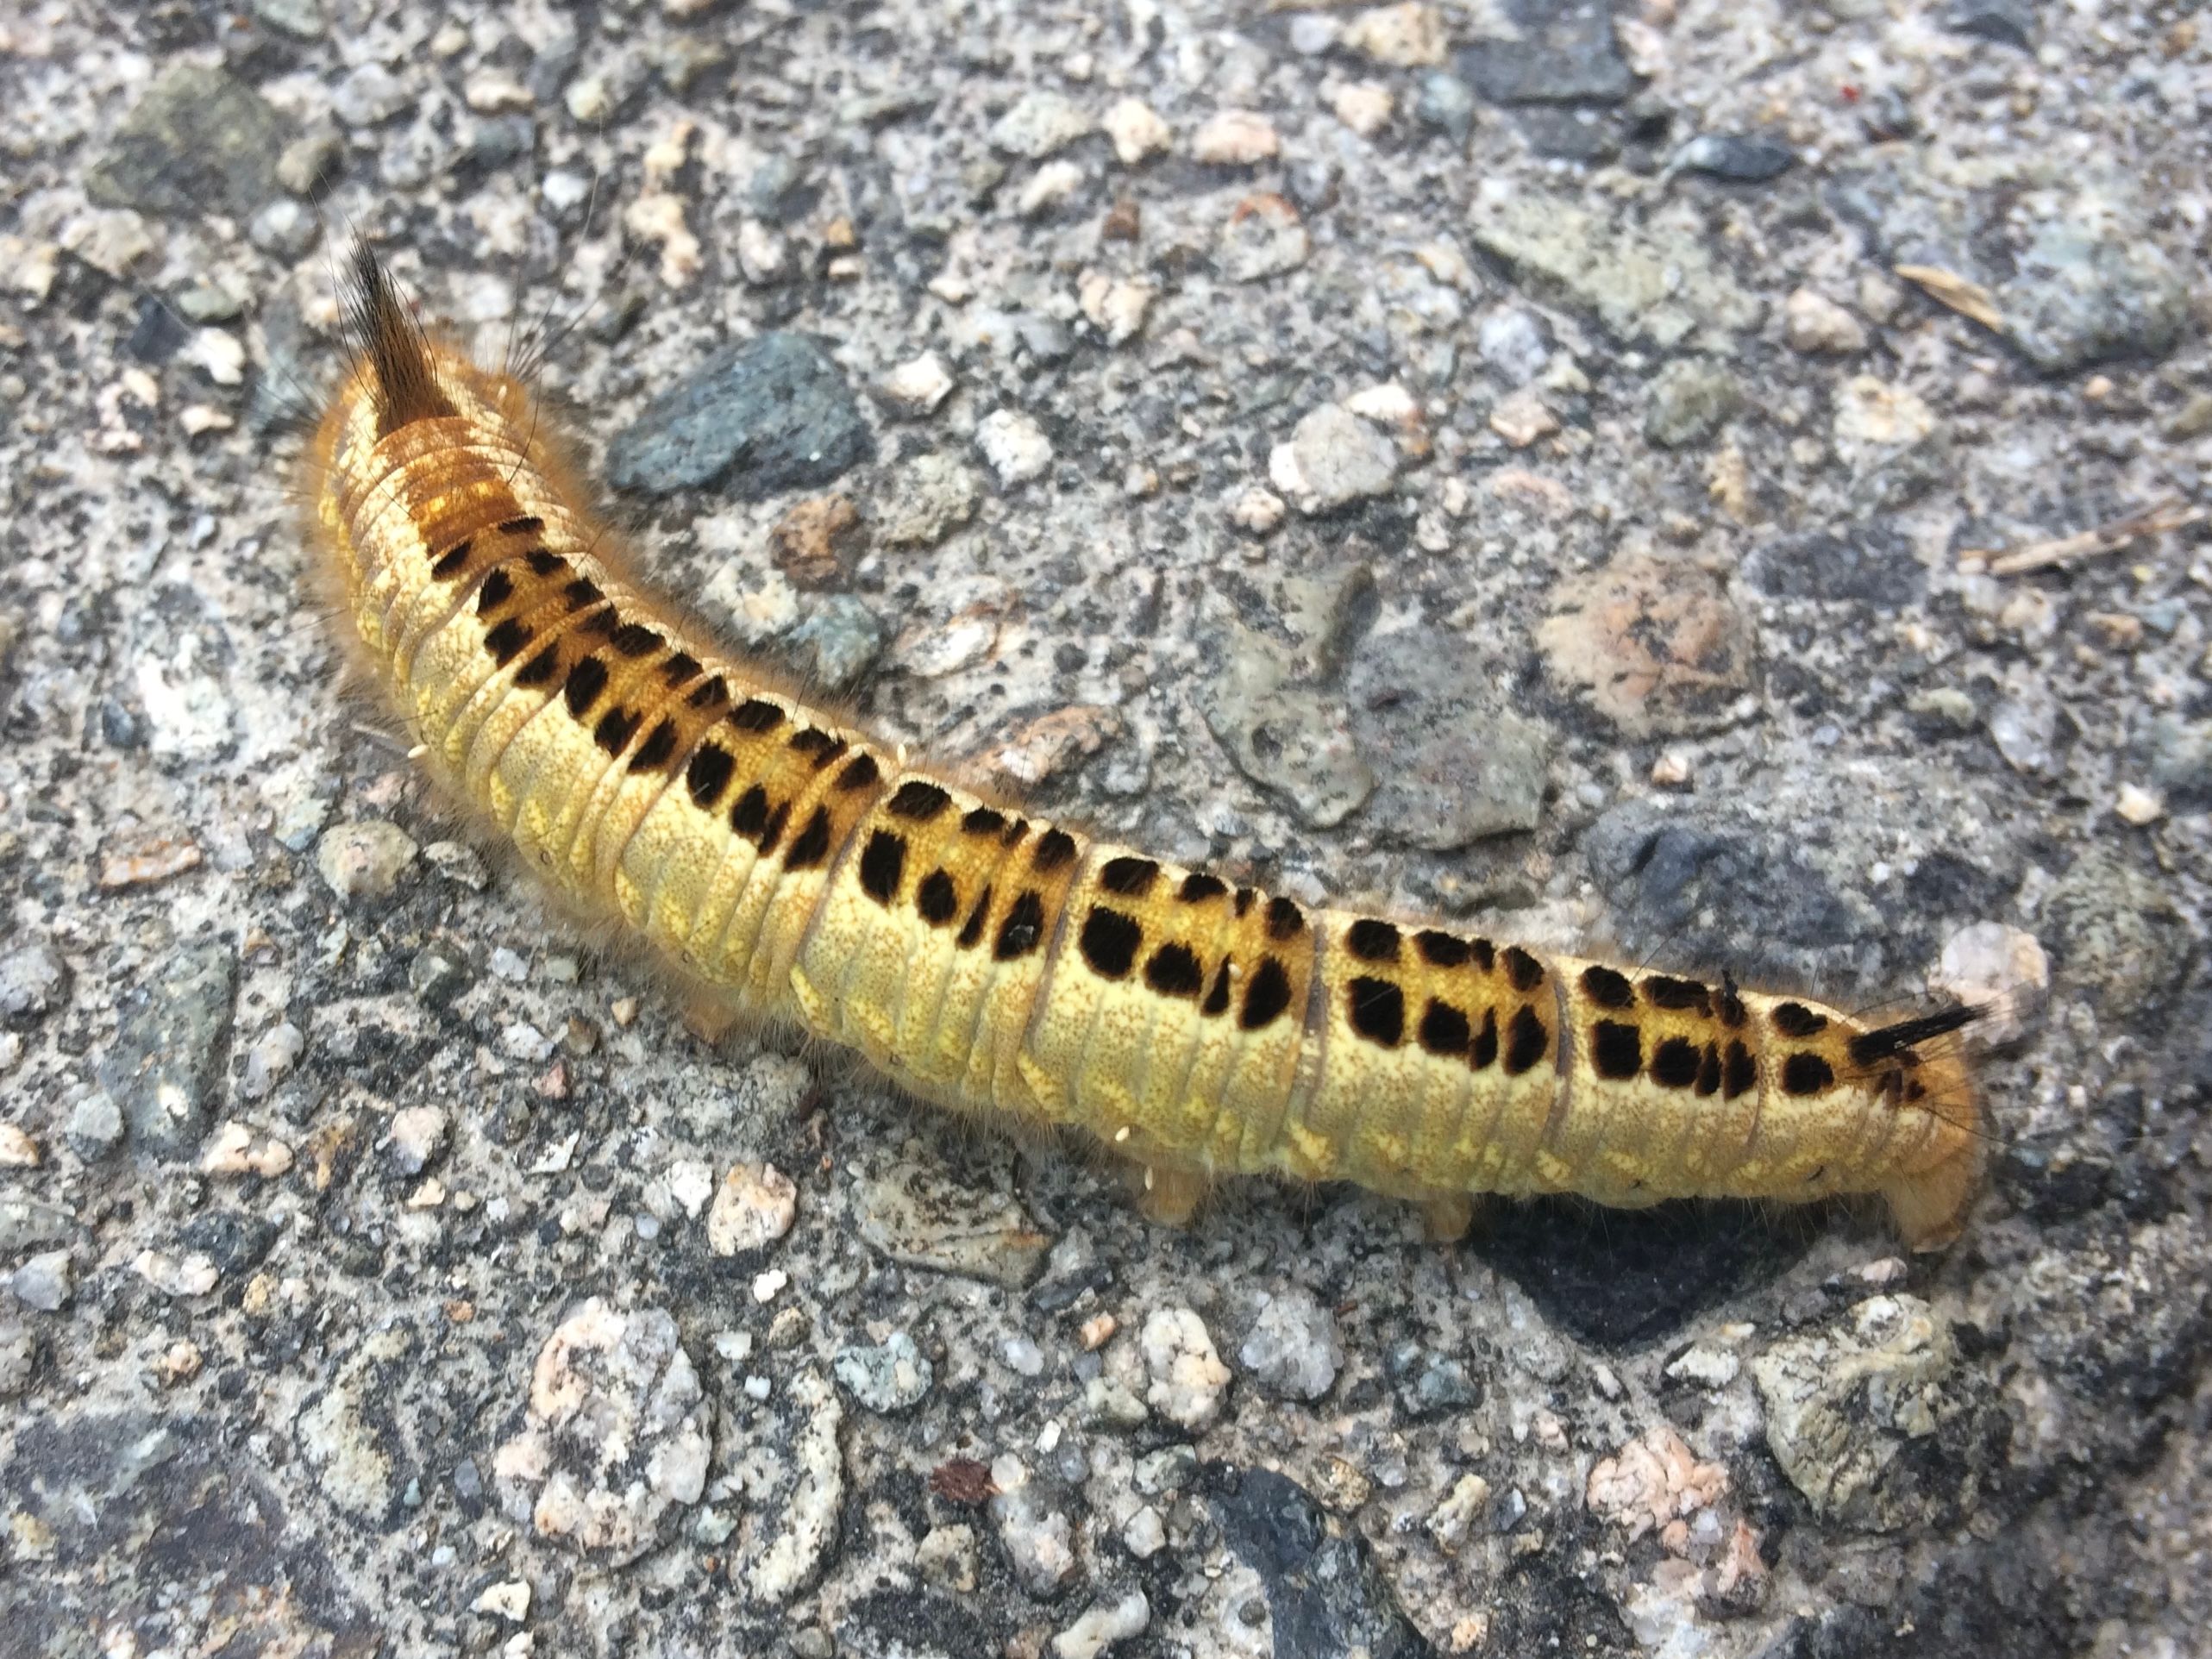 A large yellow caterpillar with yellow and black spots on its back.